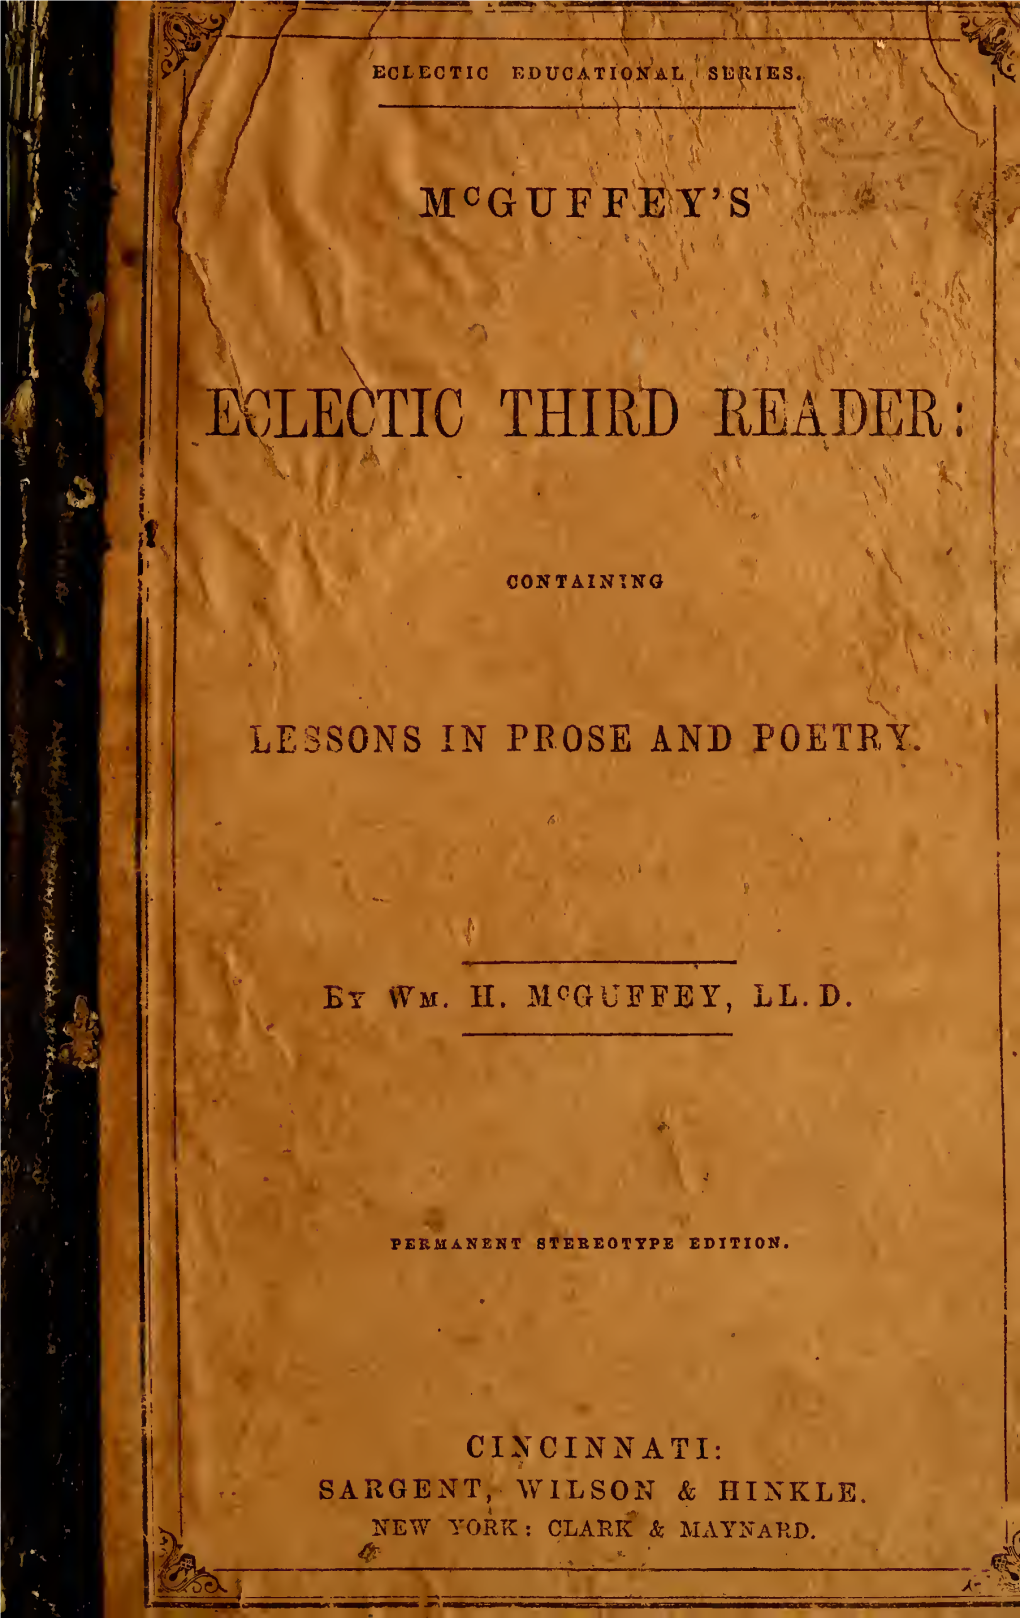 Mcguffey's Newly Revised Eclectic Third Reader